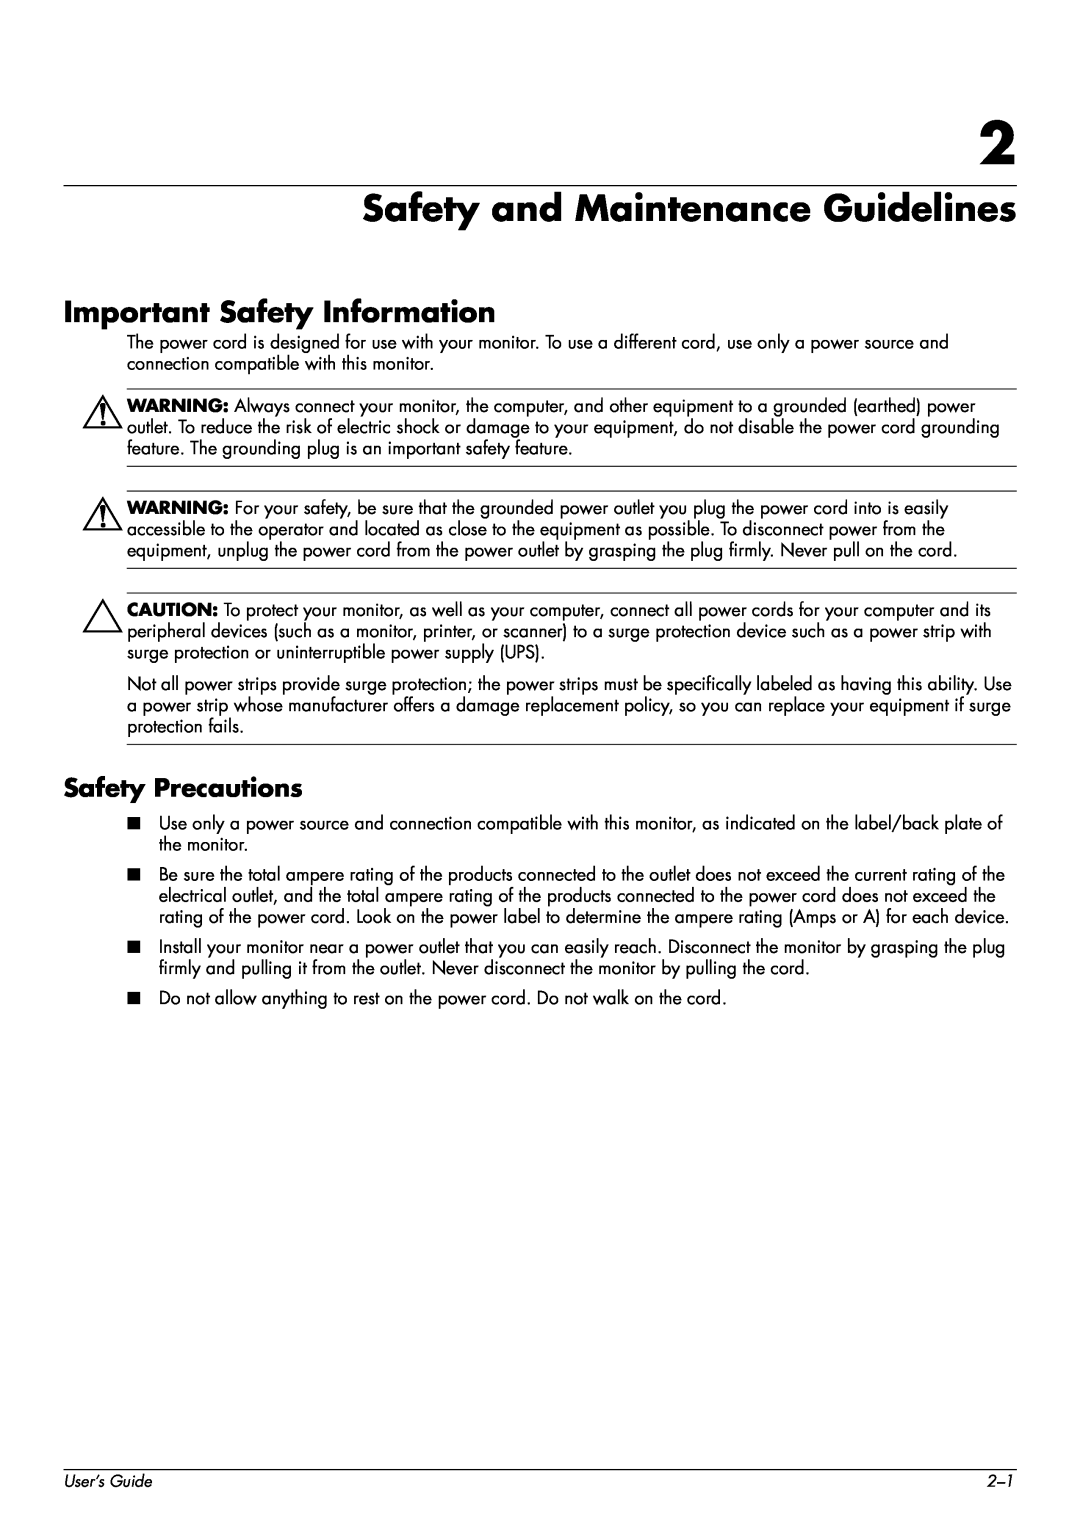 HP FP1707, W1907, W2216 manual Safety and Maintenance Guidelines, Important Safety Information, Safety Precautions 